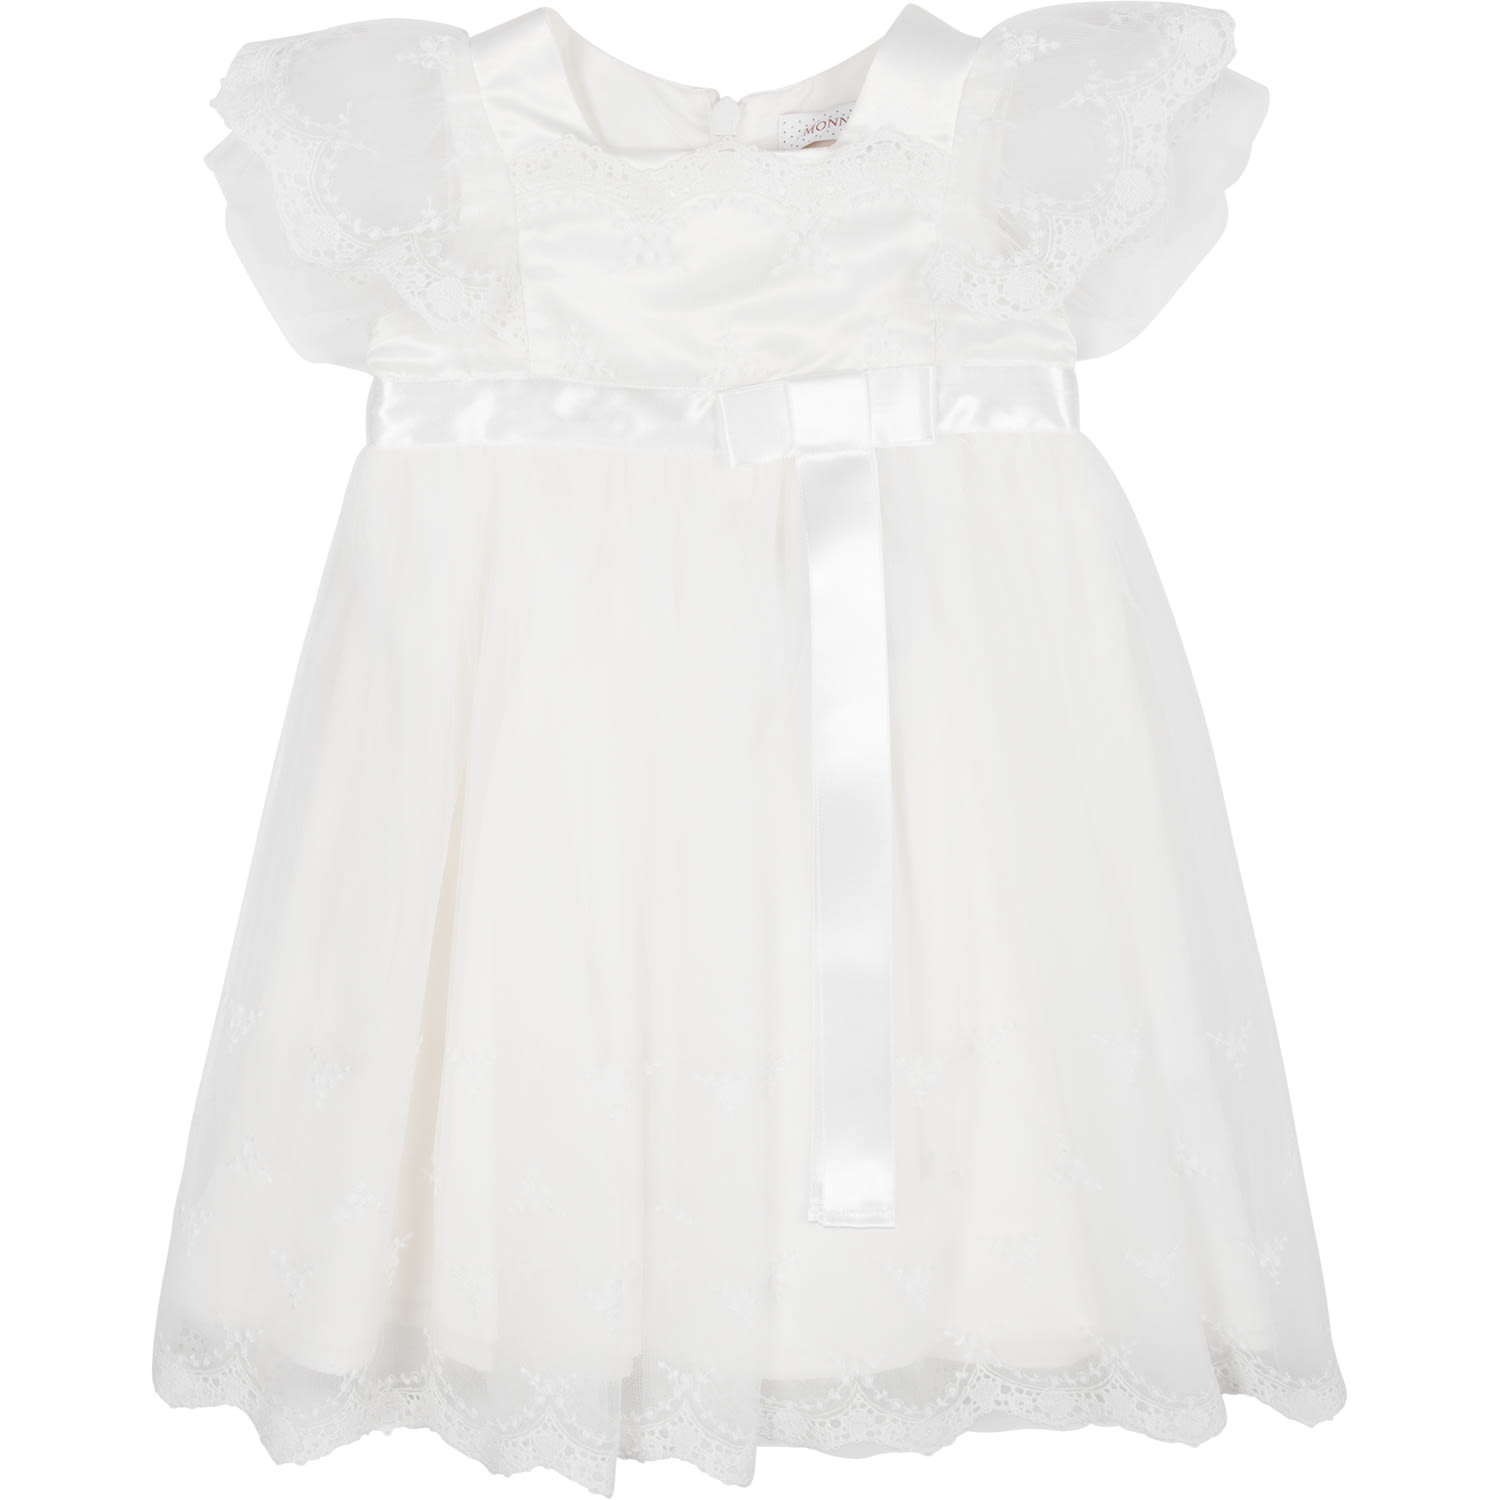 Monnalisa White Dress For Baby Girl With Embroidery And Bow